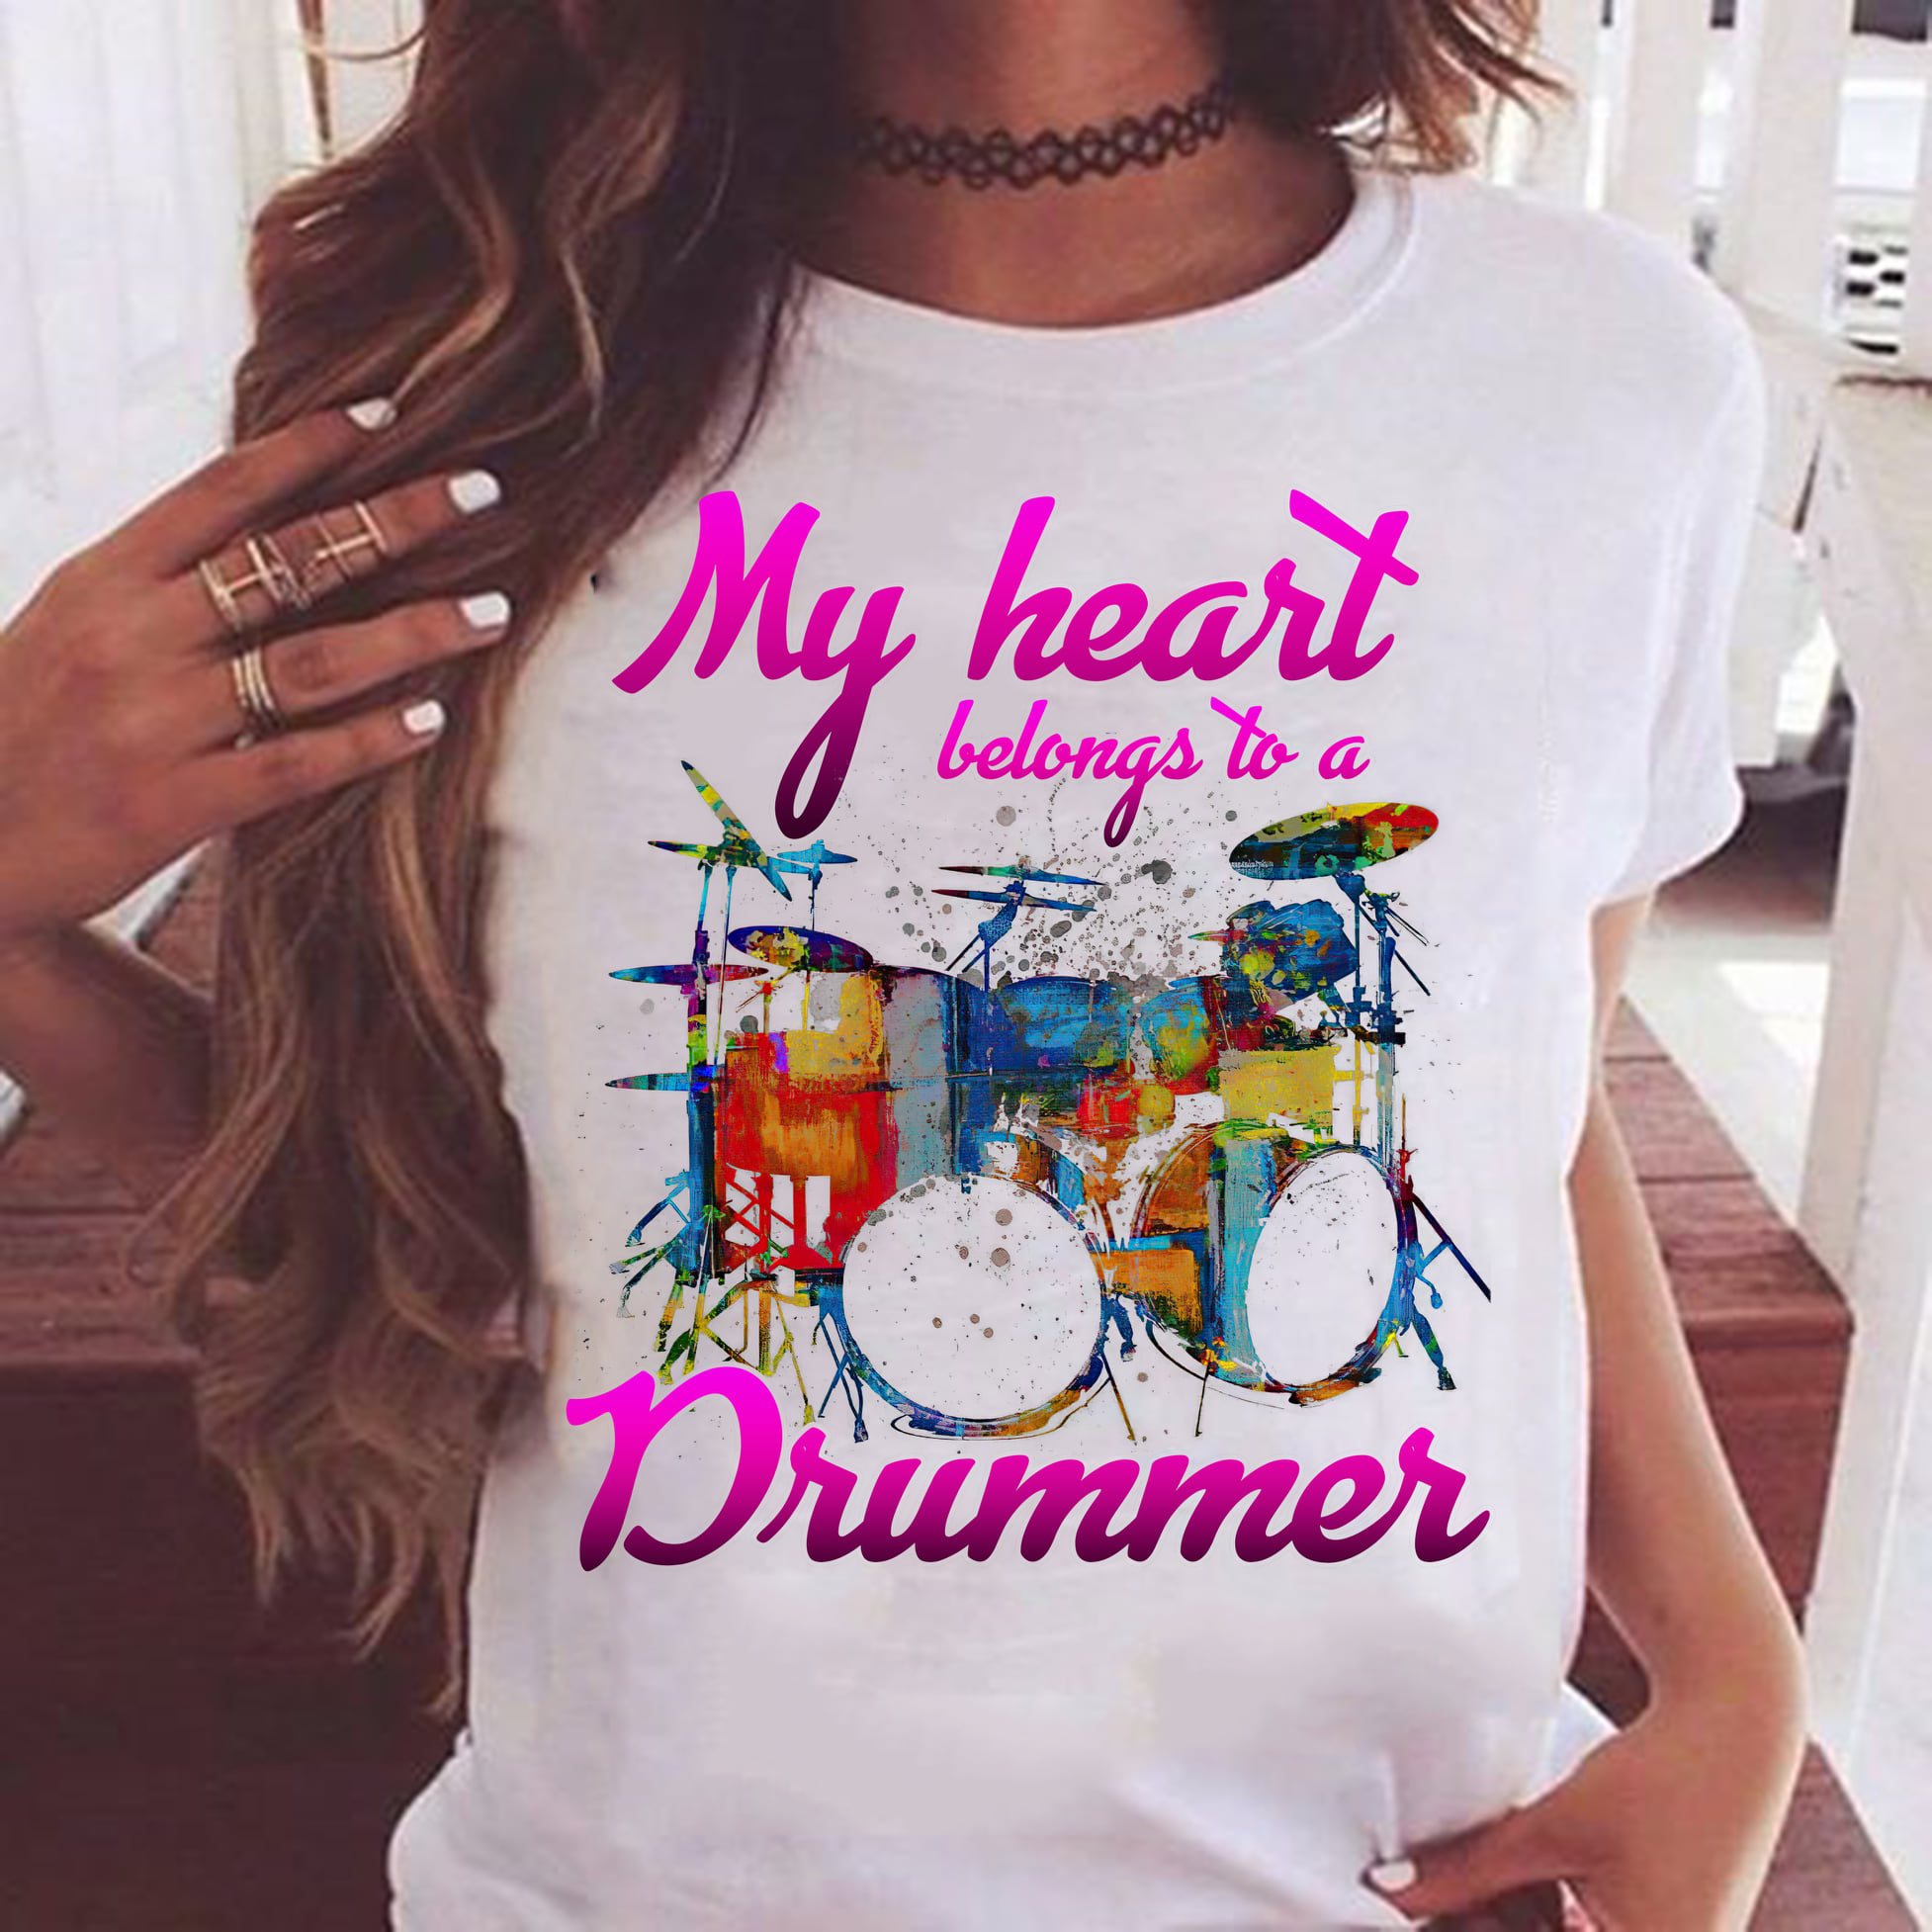 My heart belongs to a drummer - Love playing drum